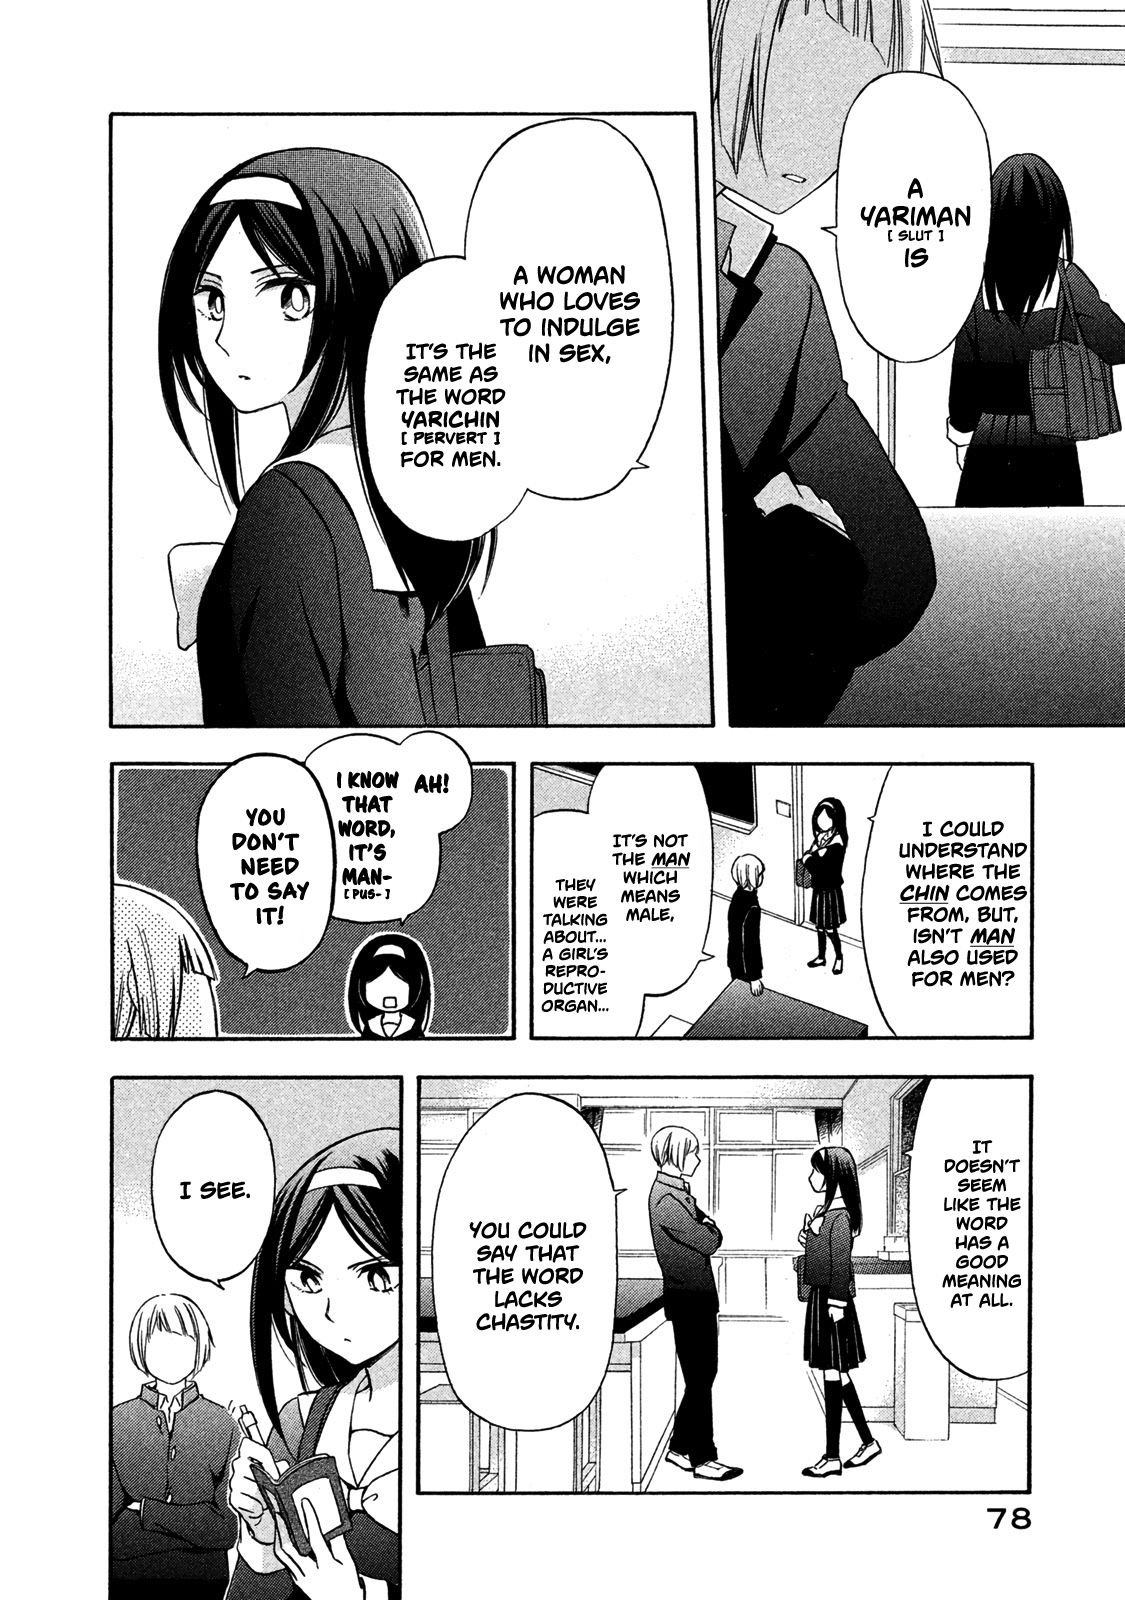 Hanazono and Kazoe's Bizarre After School Rendezvous Vol. 1 Ch. 4 Daunting Images